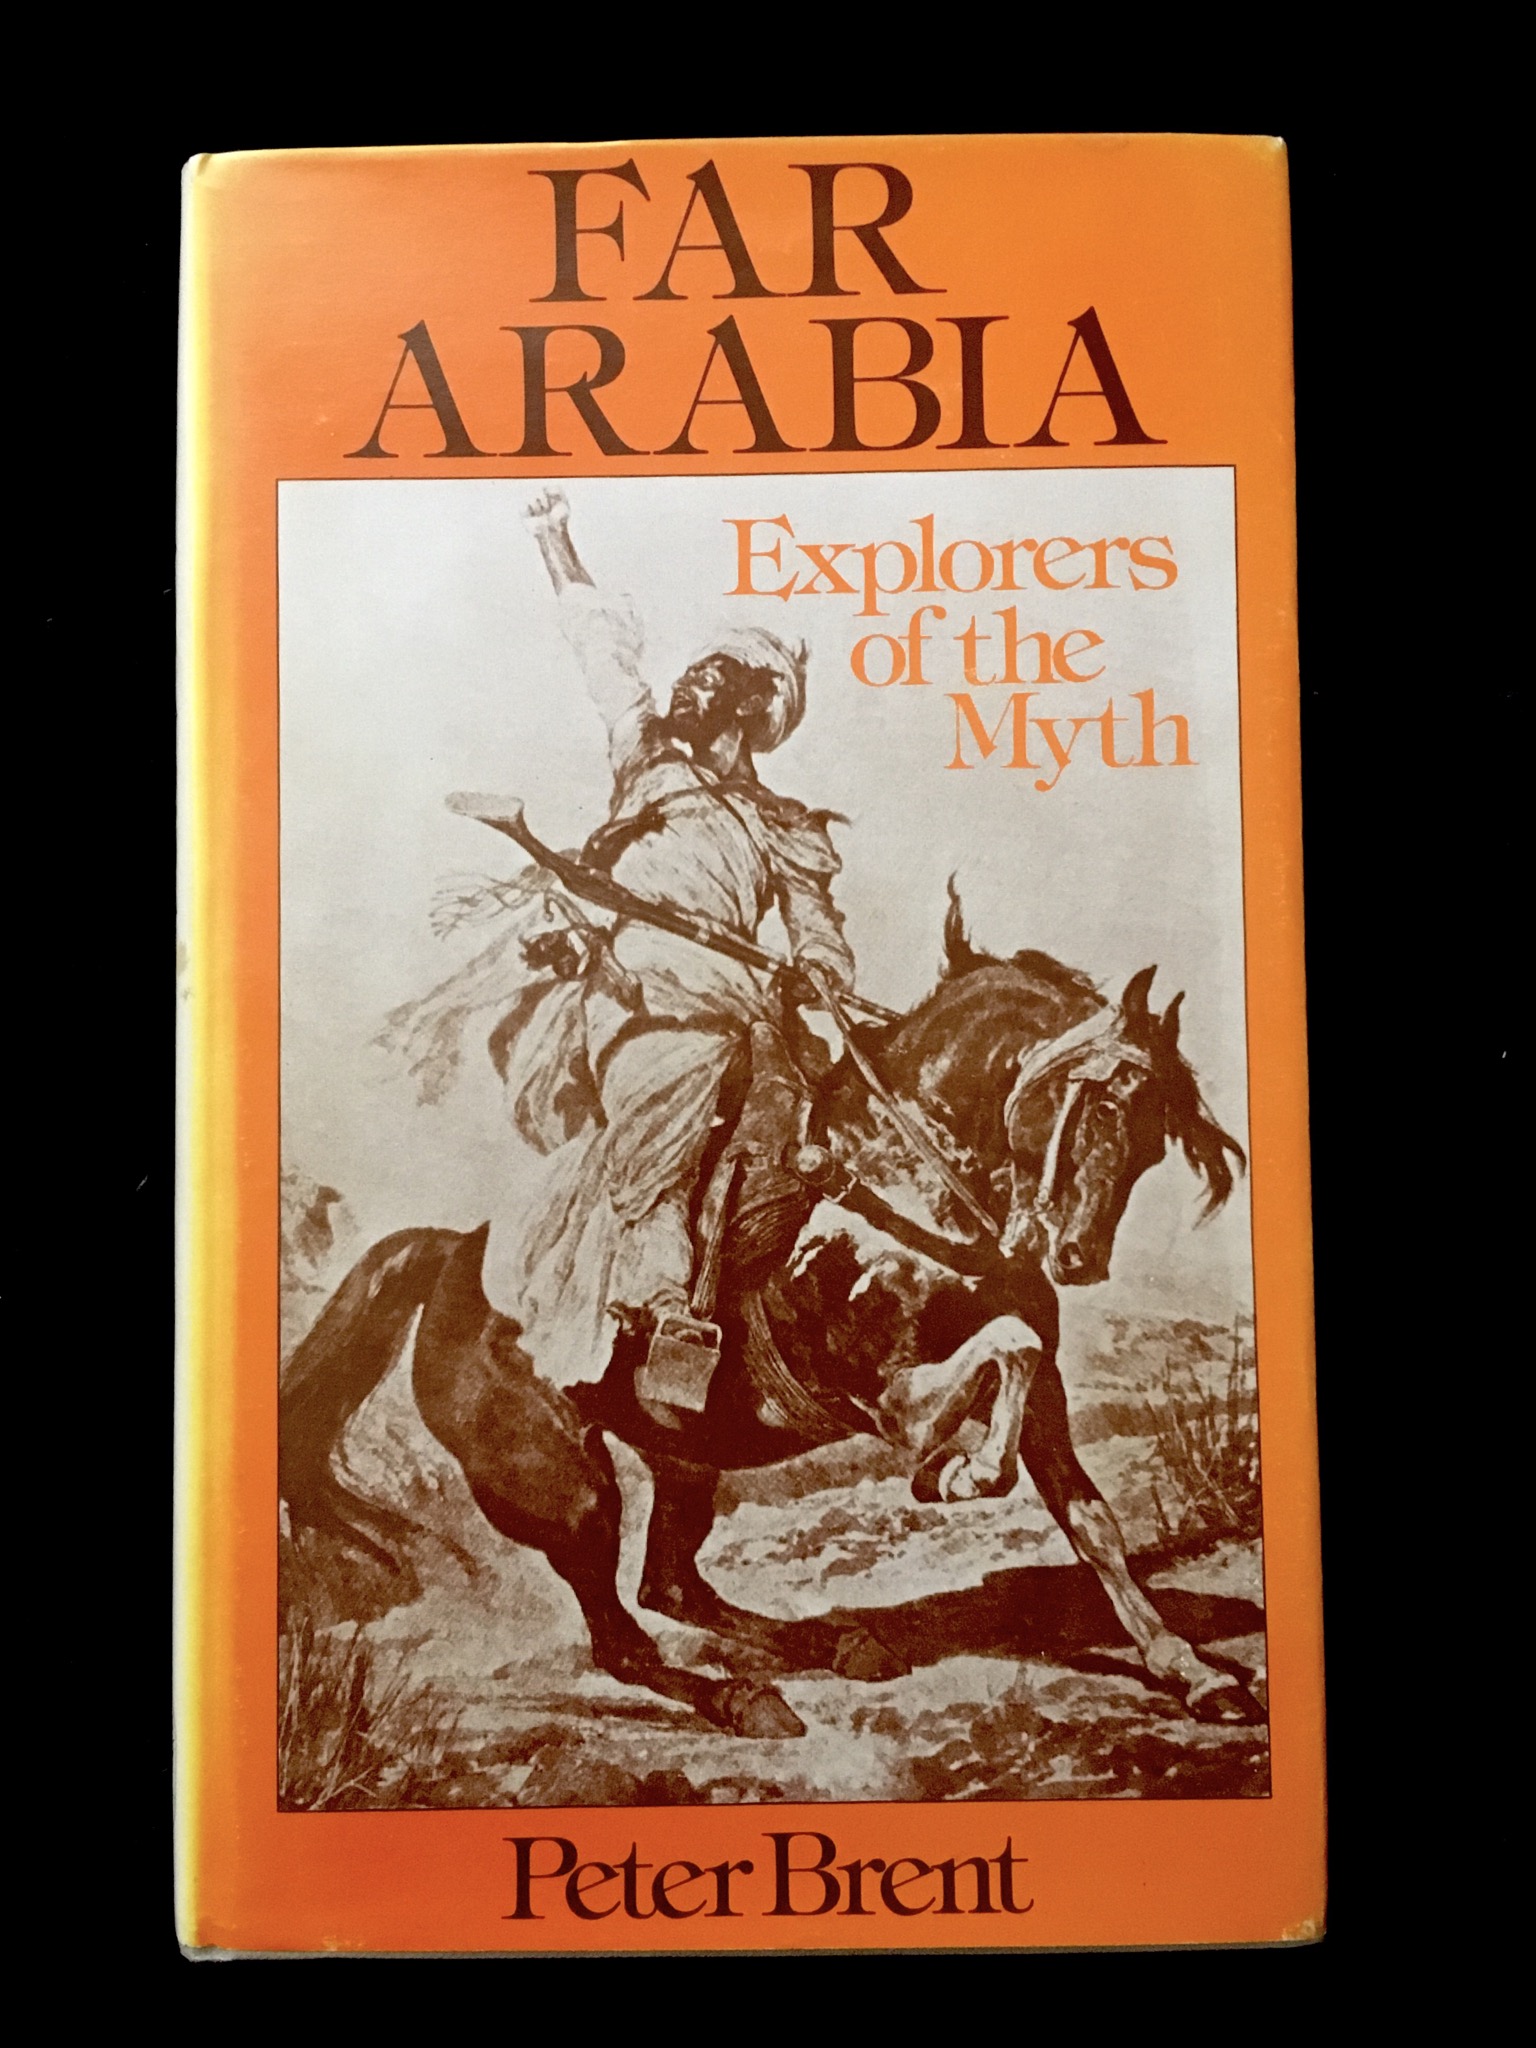 Far Arabia Explorers of the Myth by Peter Brent